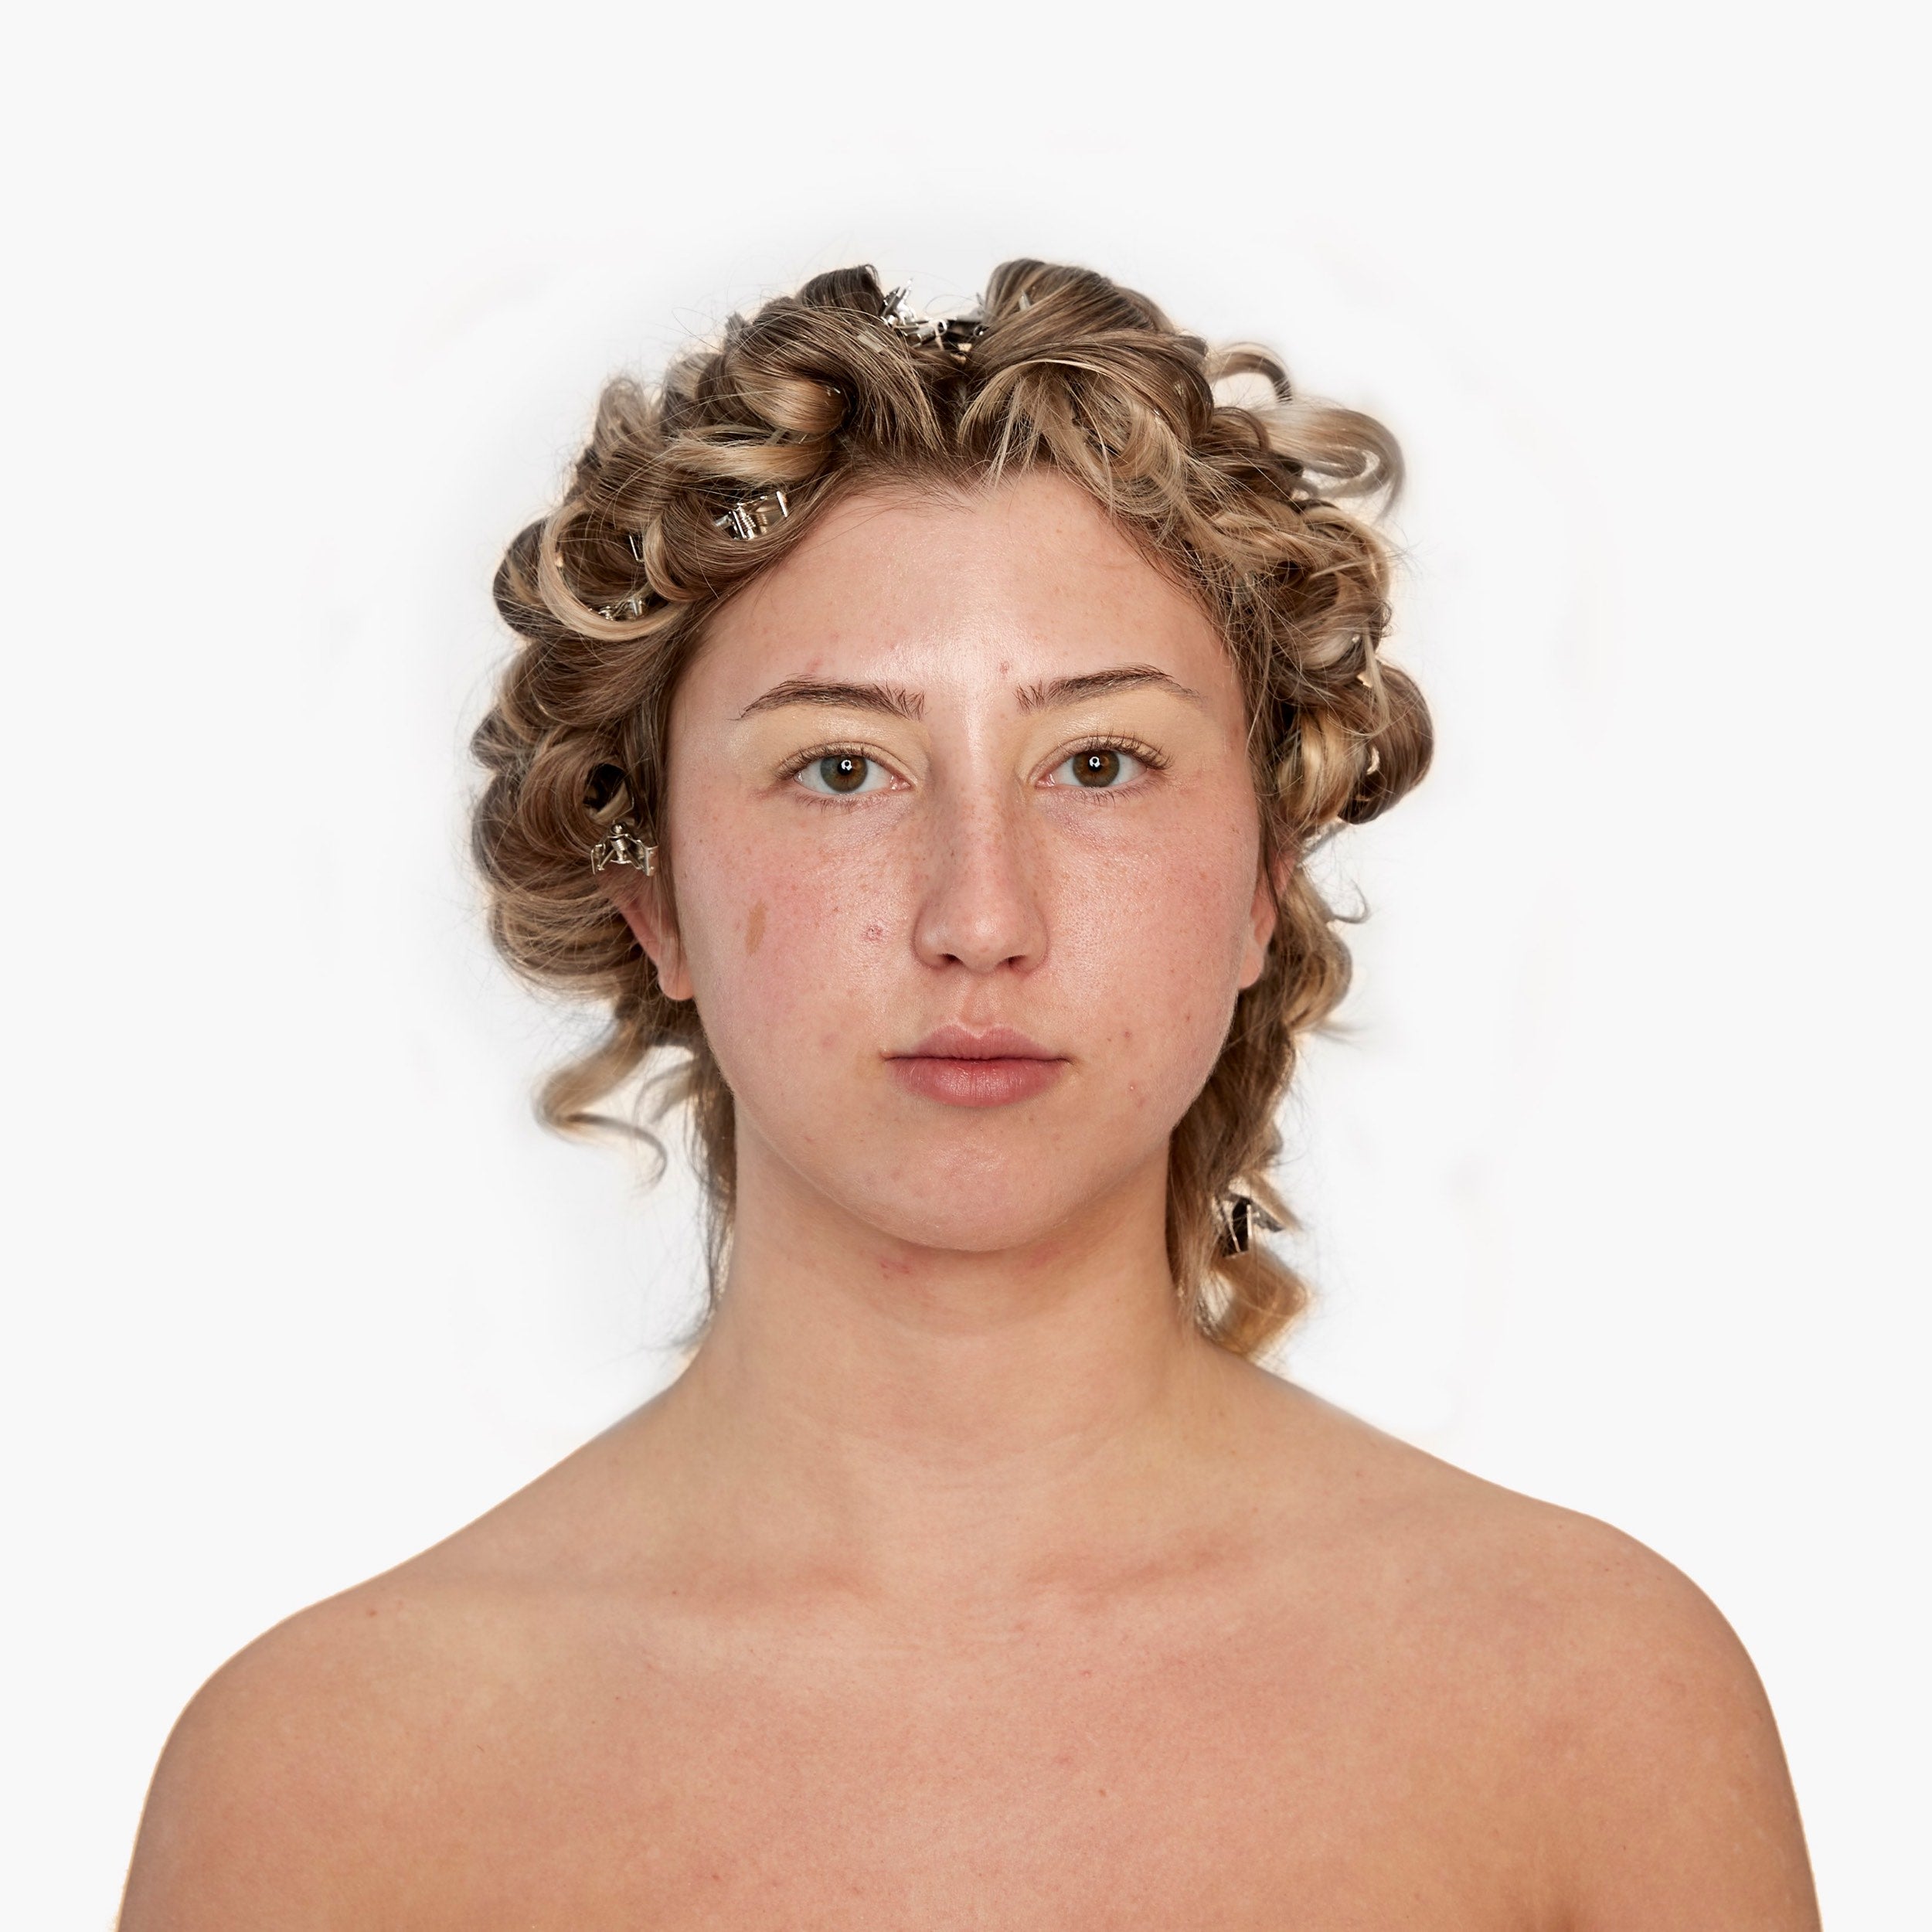 Image of woman with out make up on